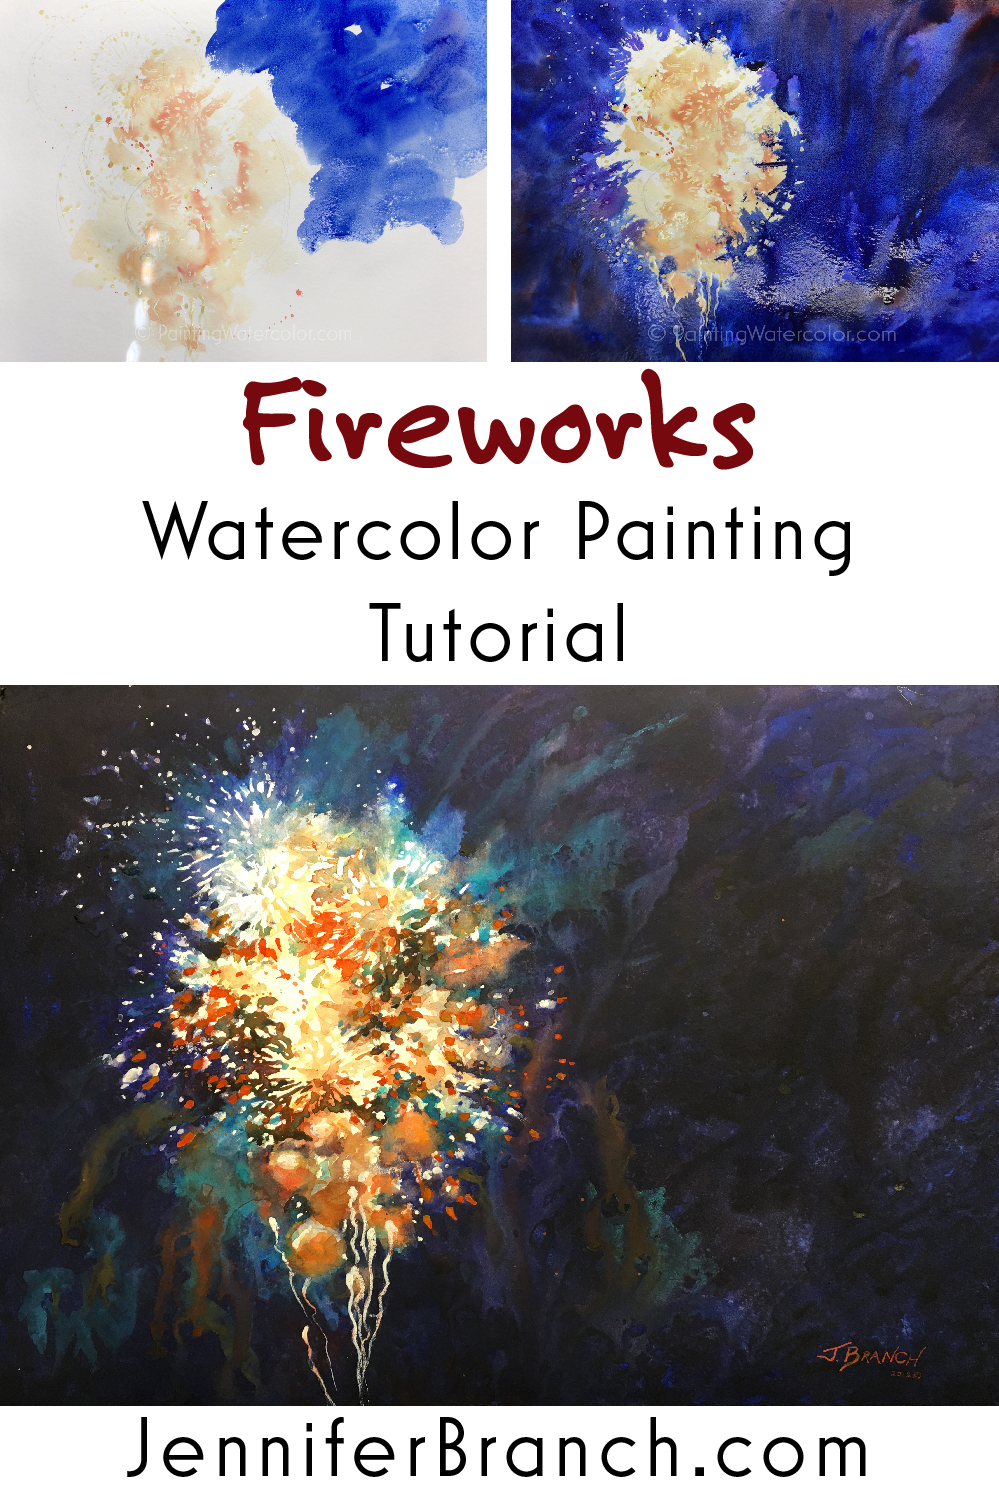 Fireworks Painting Tutorial watercolor painting tutorial by Jennifer Branch